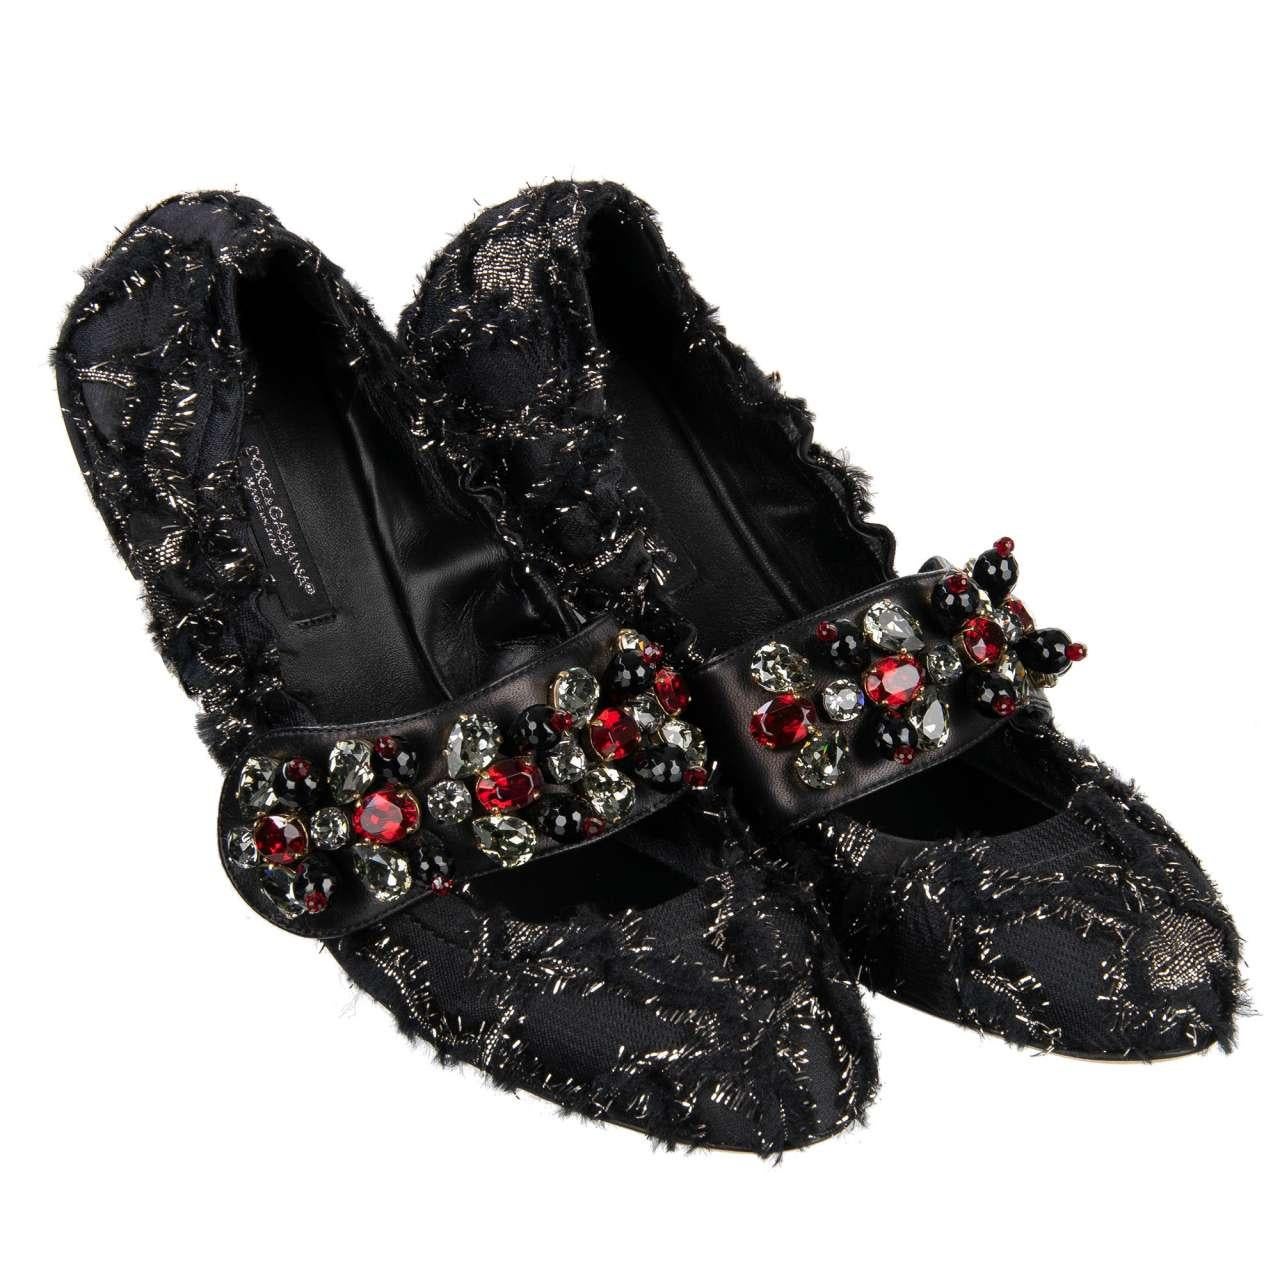 - Elastic brocade ballet flats VALLY with crystals embellished strap by DOLCE & GABBANA Black Label - MADE IN ITALY - New with Box - Former RRP: EUR 850 - Model: CB0096-B9H51-8B979 - Material: 34% Acetat, 17% Wolle, 17% Silk, 12% Polyester, 10%